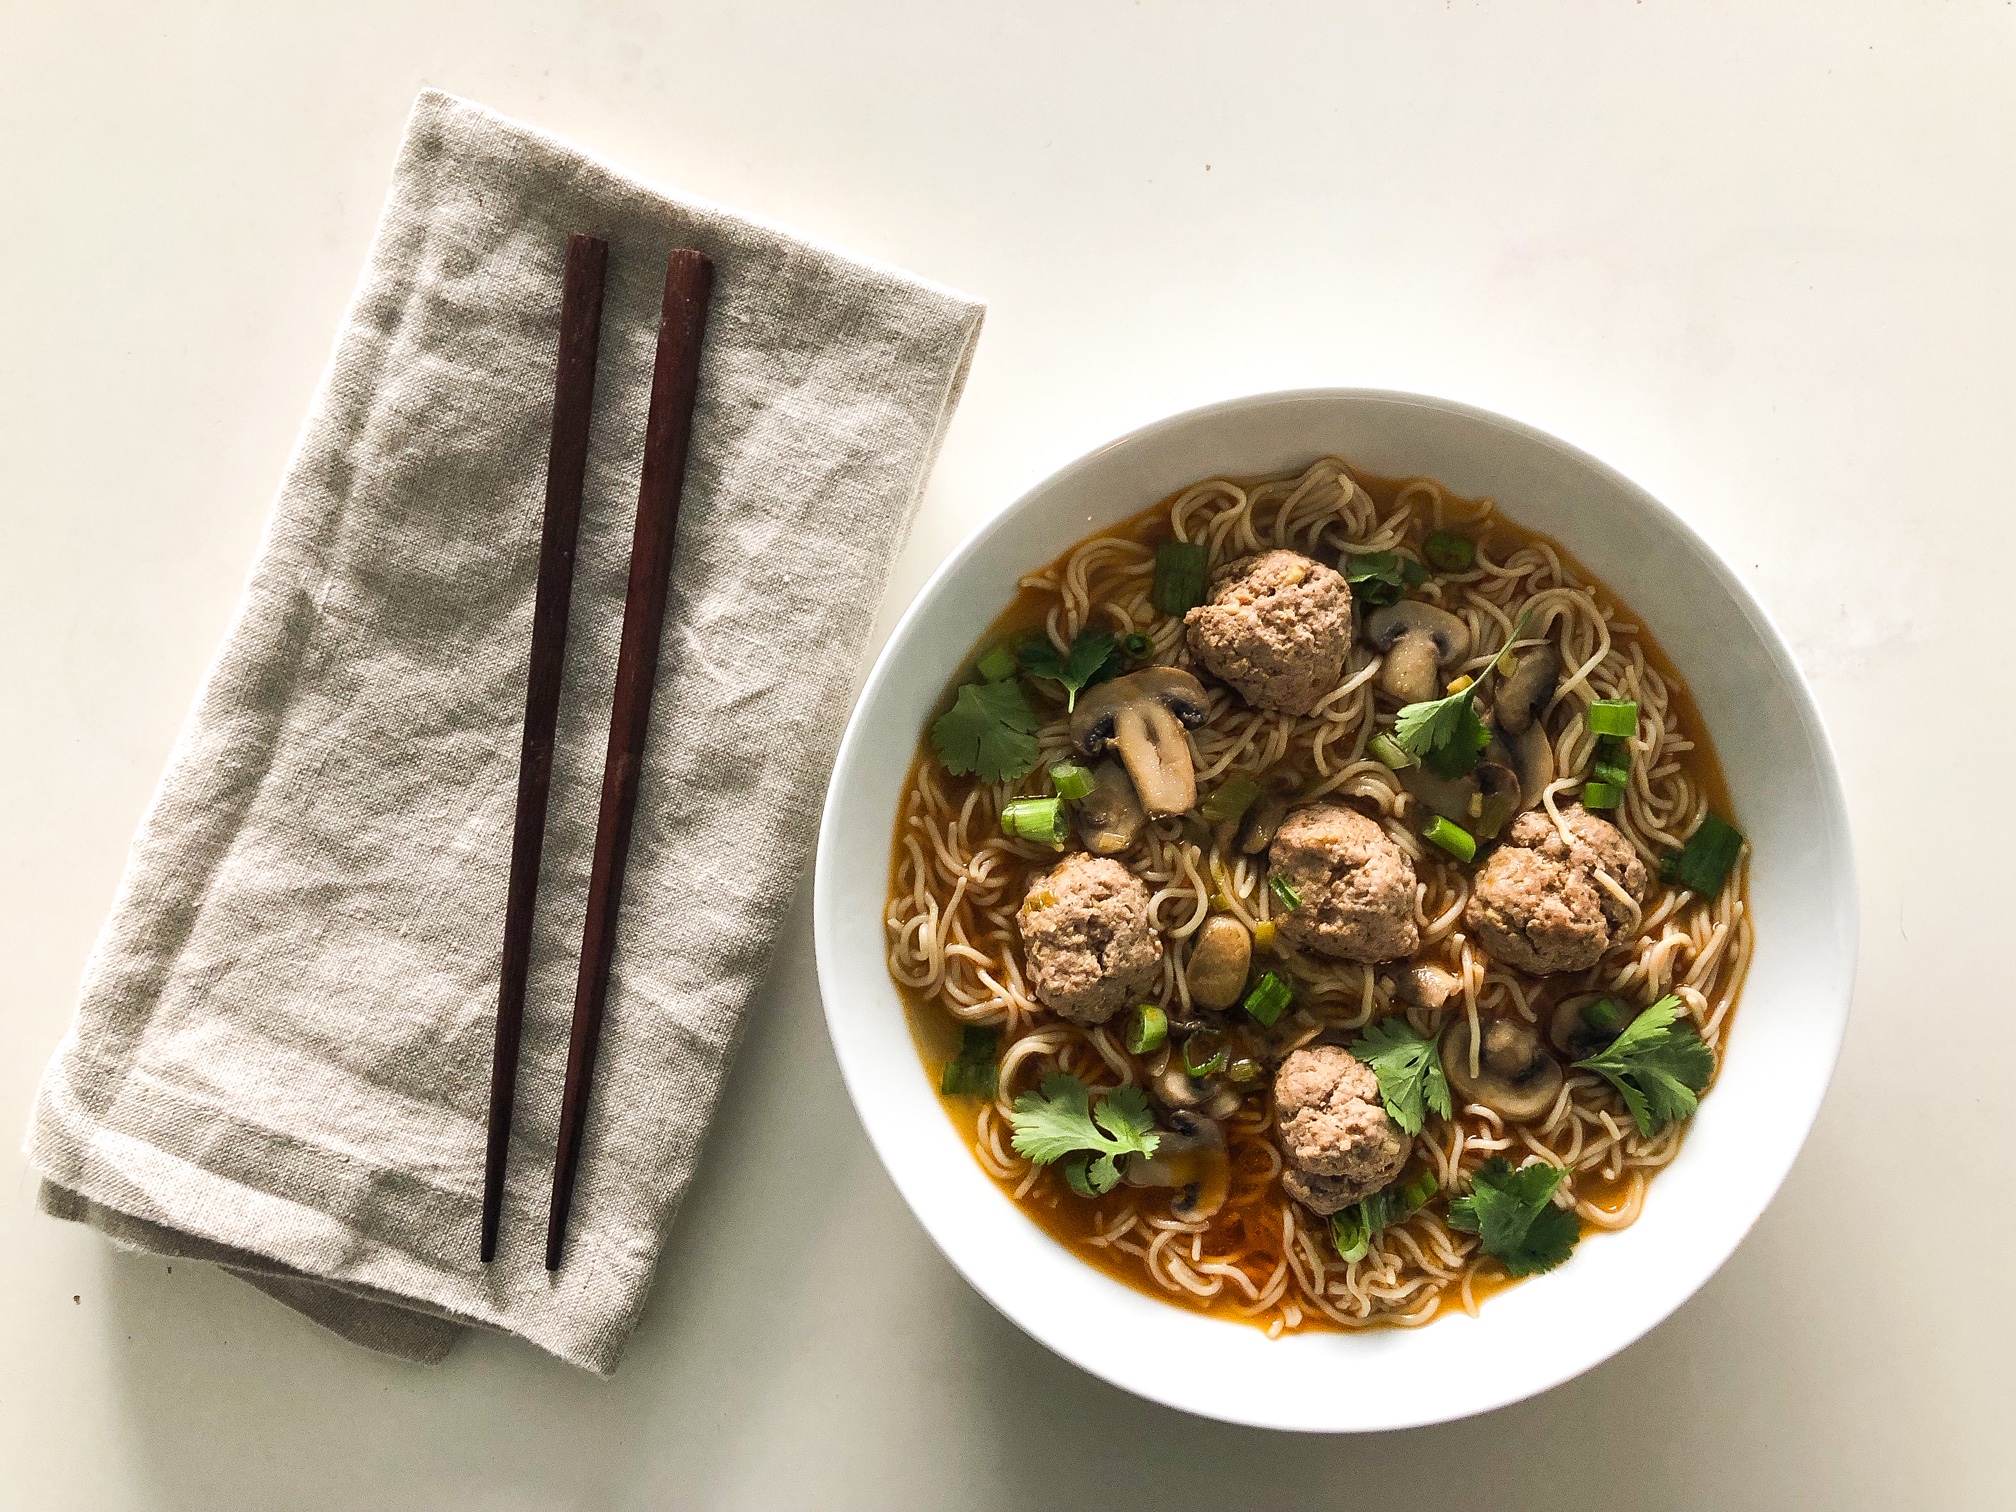 Wonton inspired soup with meatballs & noodles